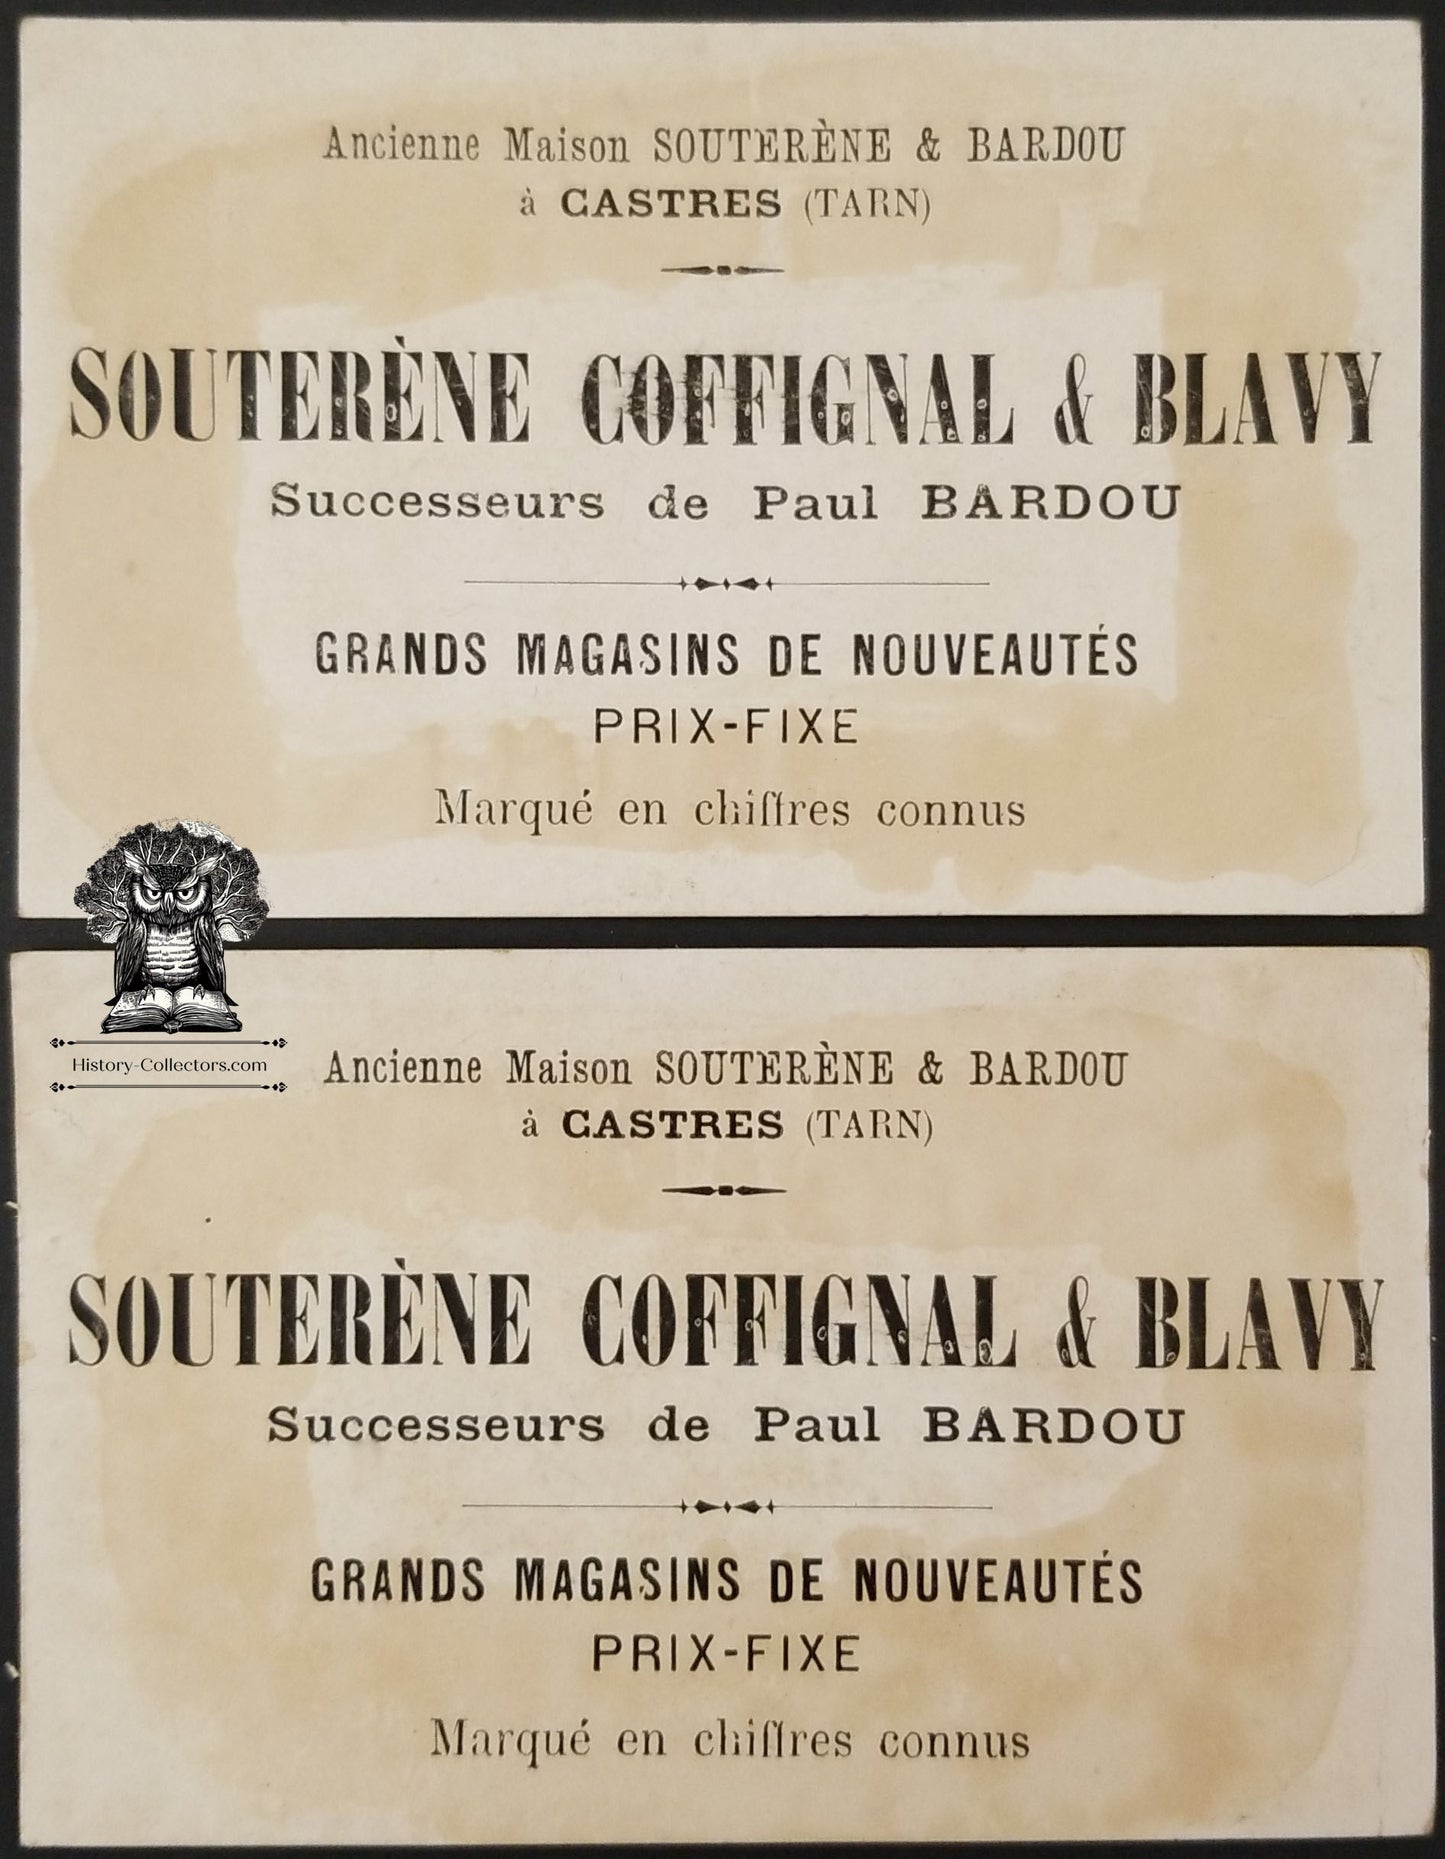 Antique French Advertising Trade Card Lot x2 - Souterene Coffignal & Blavy